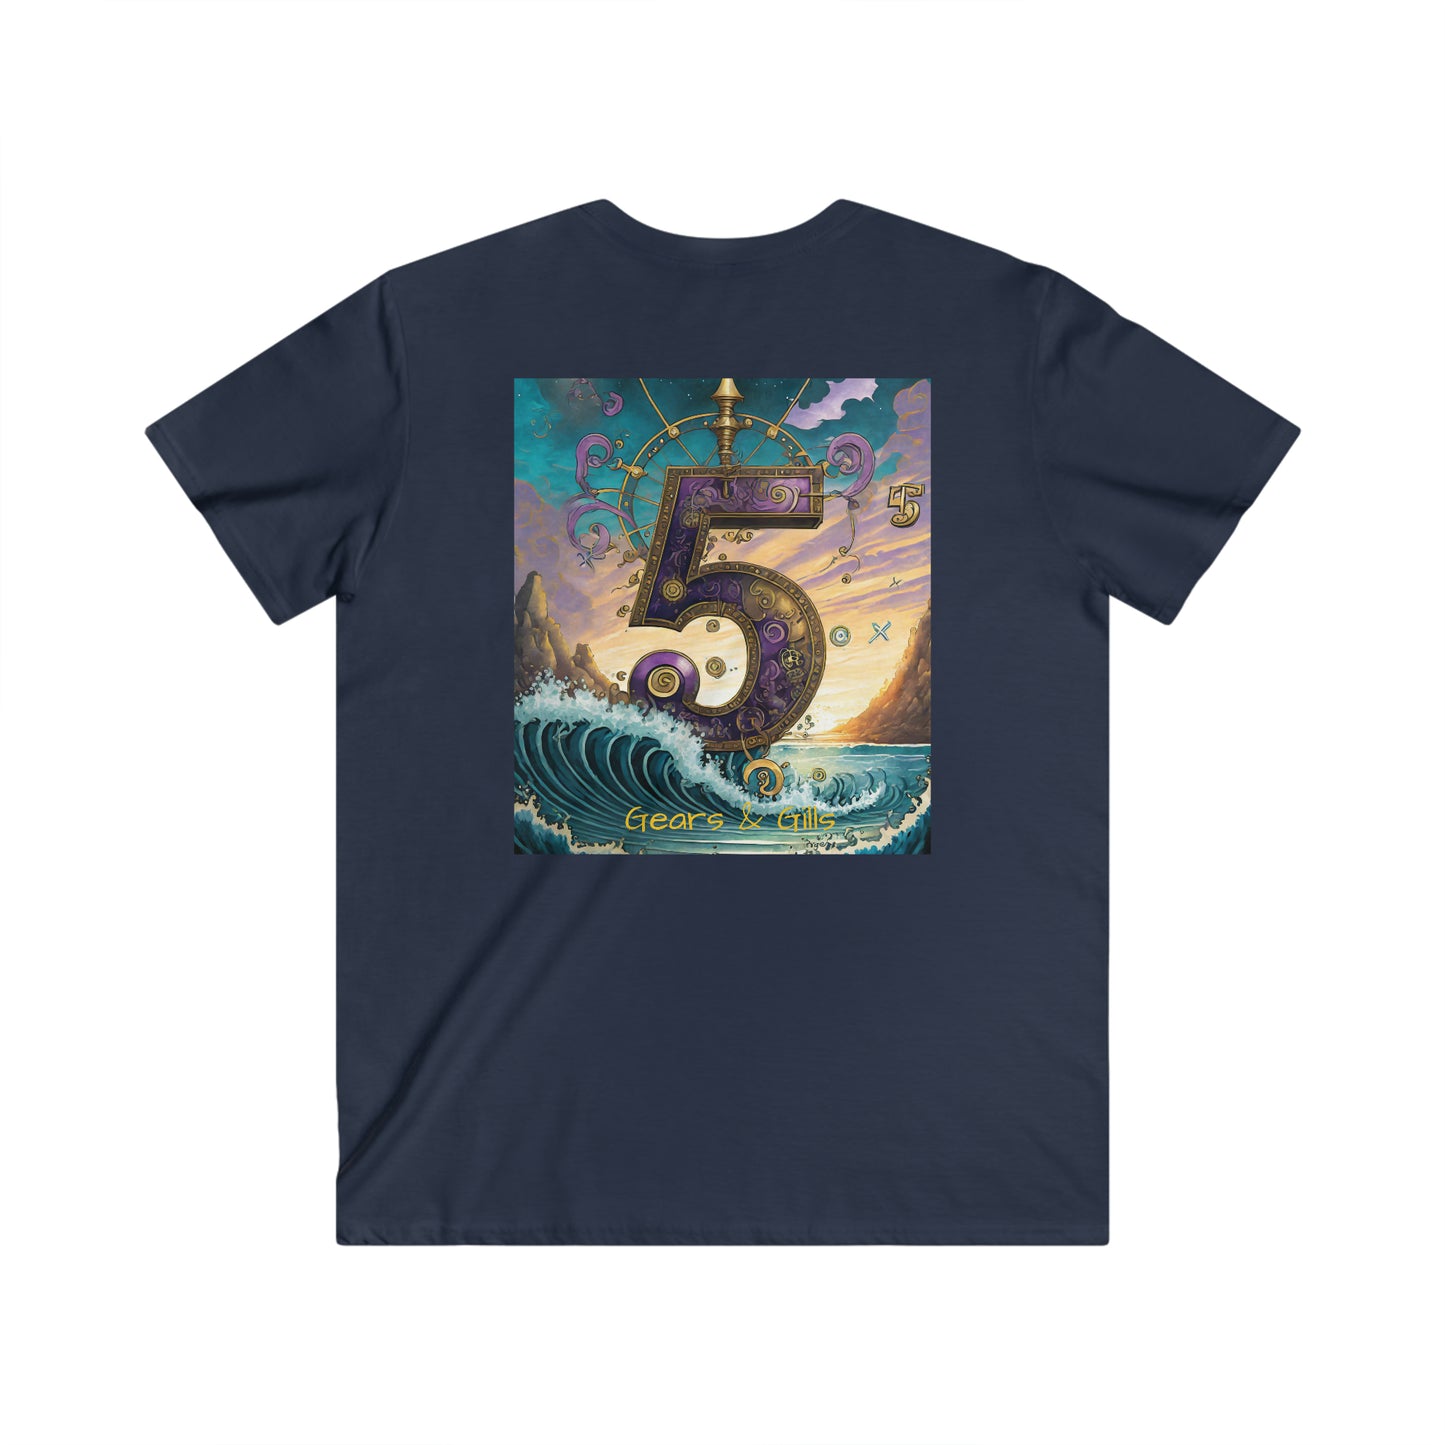 Unisex Adult Fitted V-Neck Short Sleeve Tee Gear & Gills: A Steampunk gematria Fishery